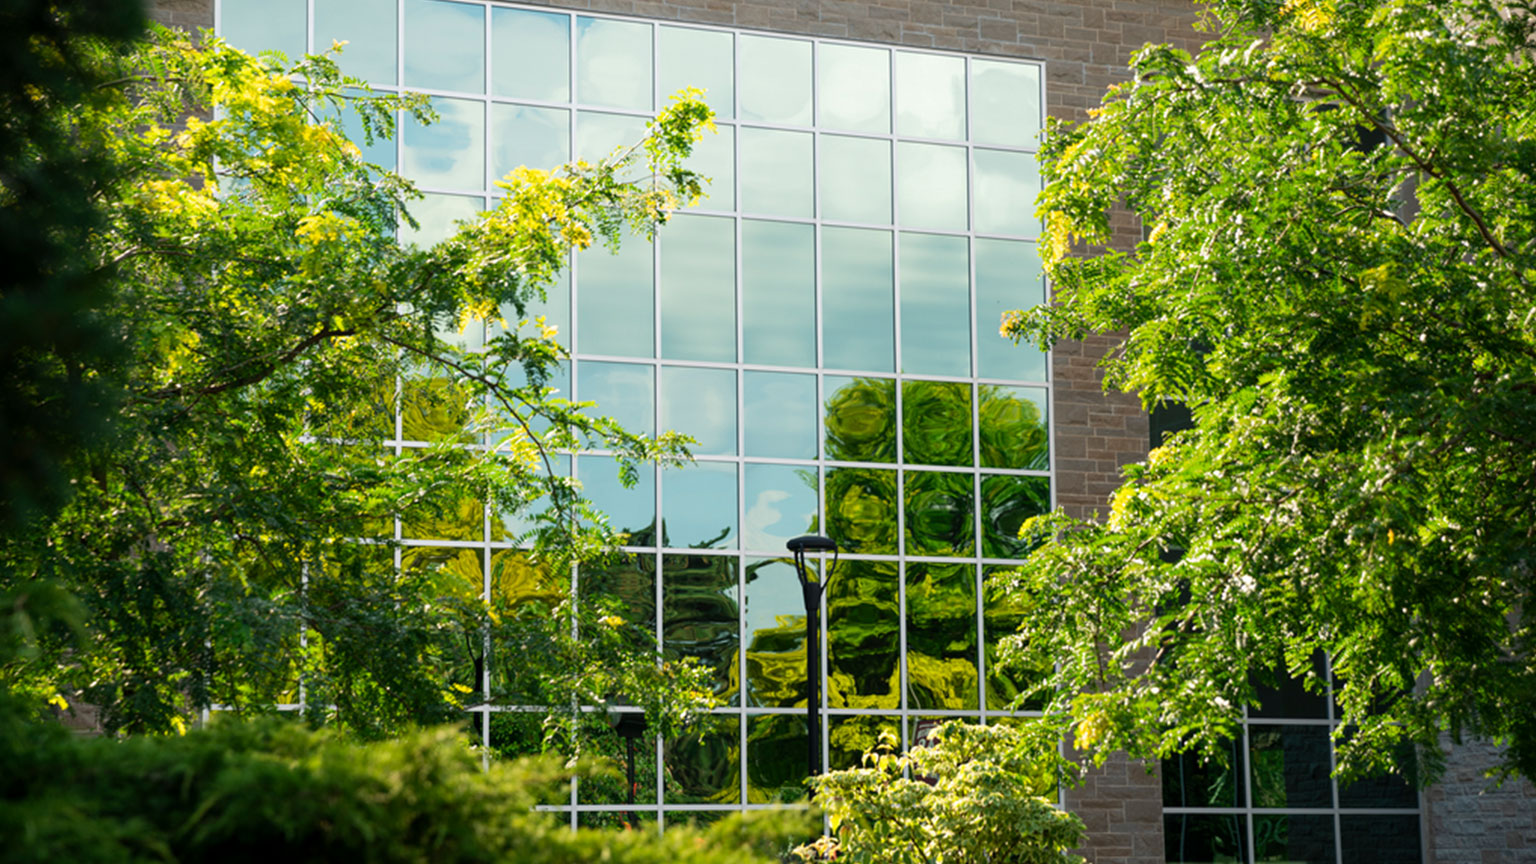 The windows of John Hodgins Engineering Buildings with green trees and a blue sky reflected in them